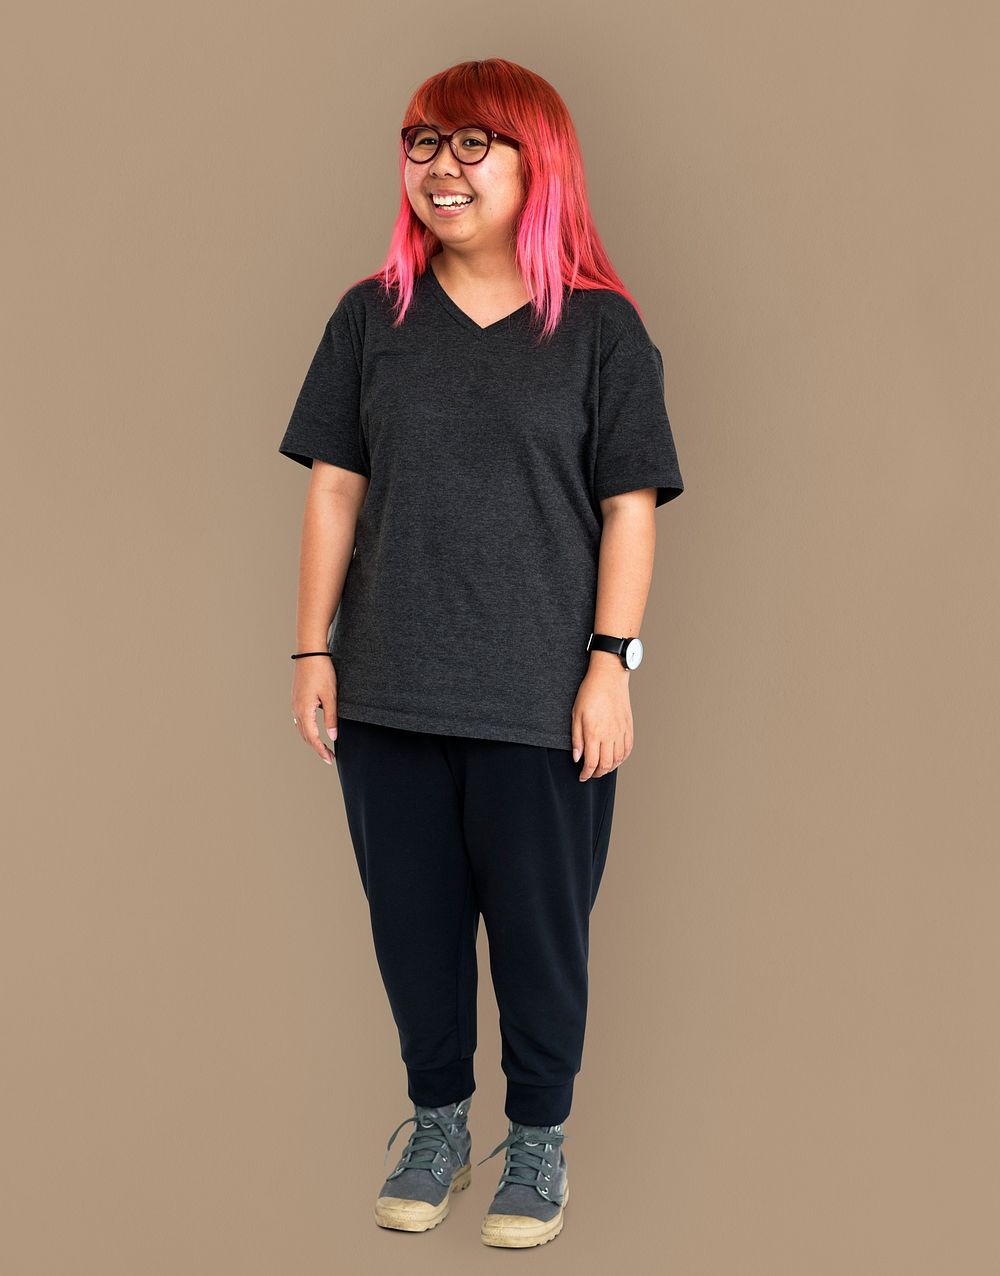 Young adult asian girl standing and smiling studio portrait